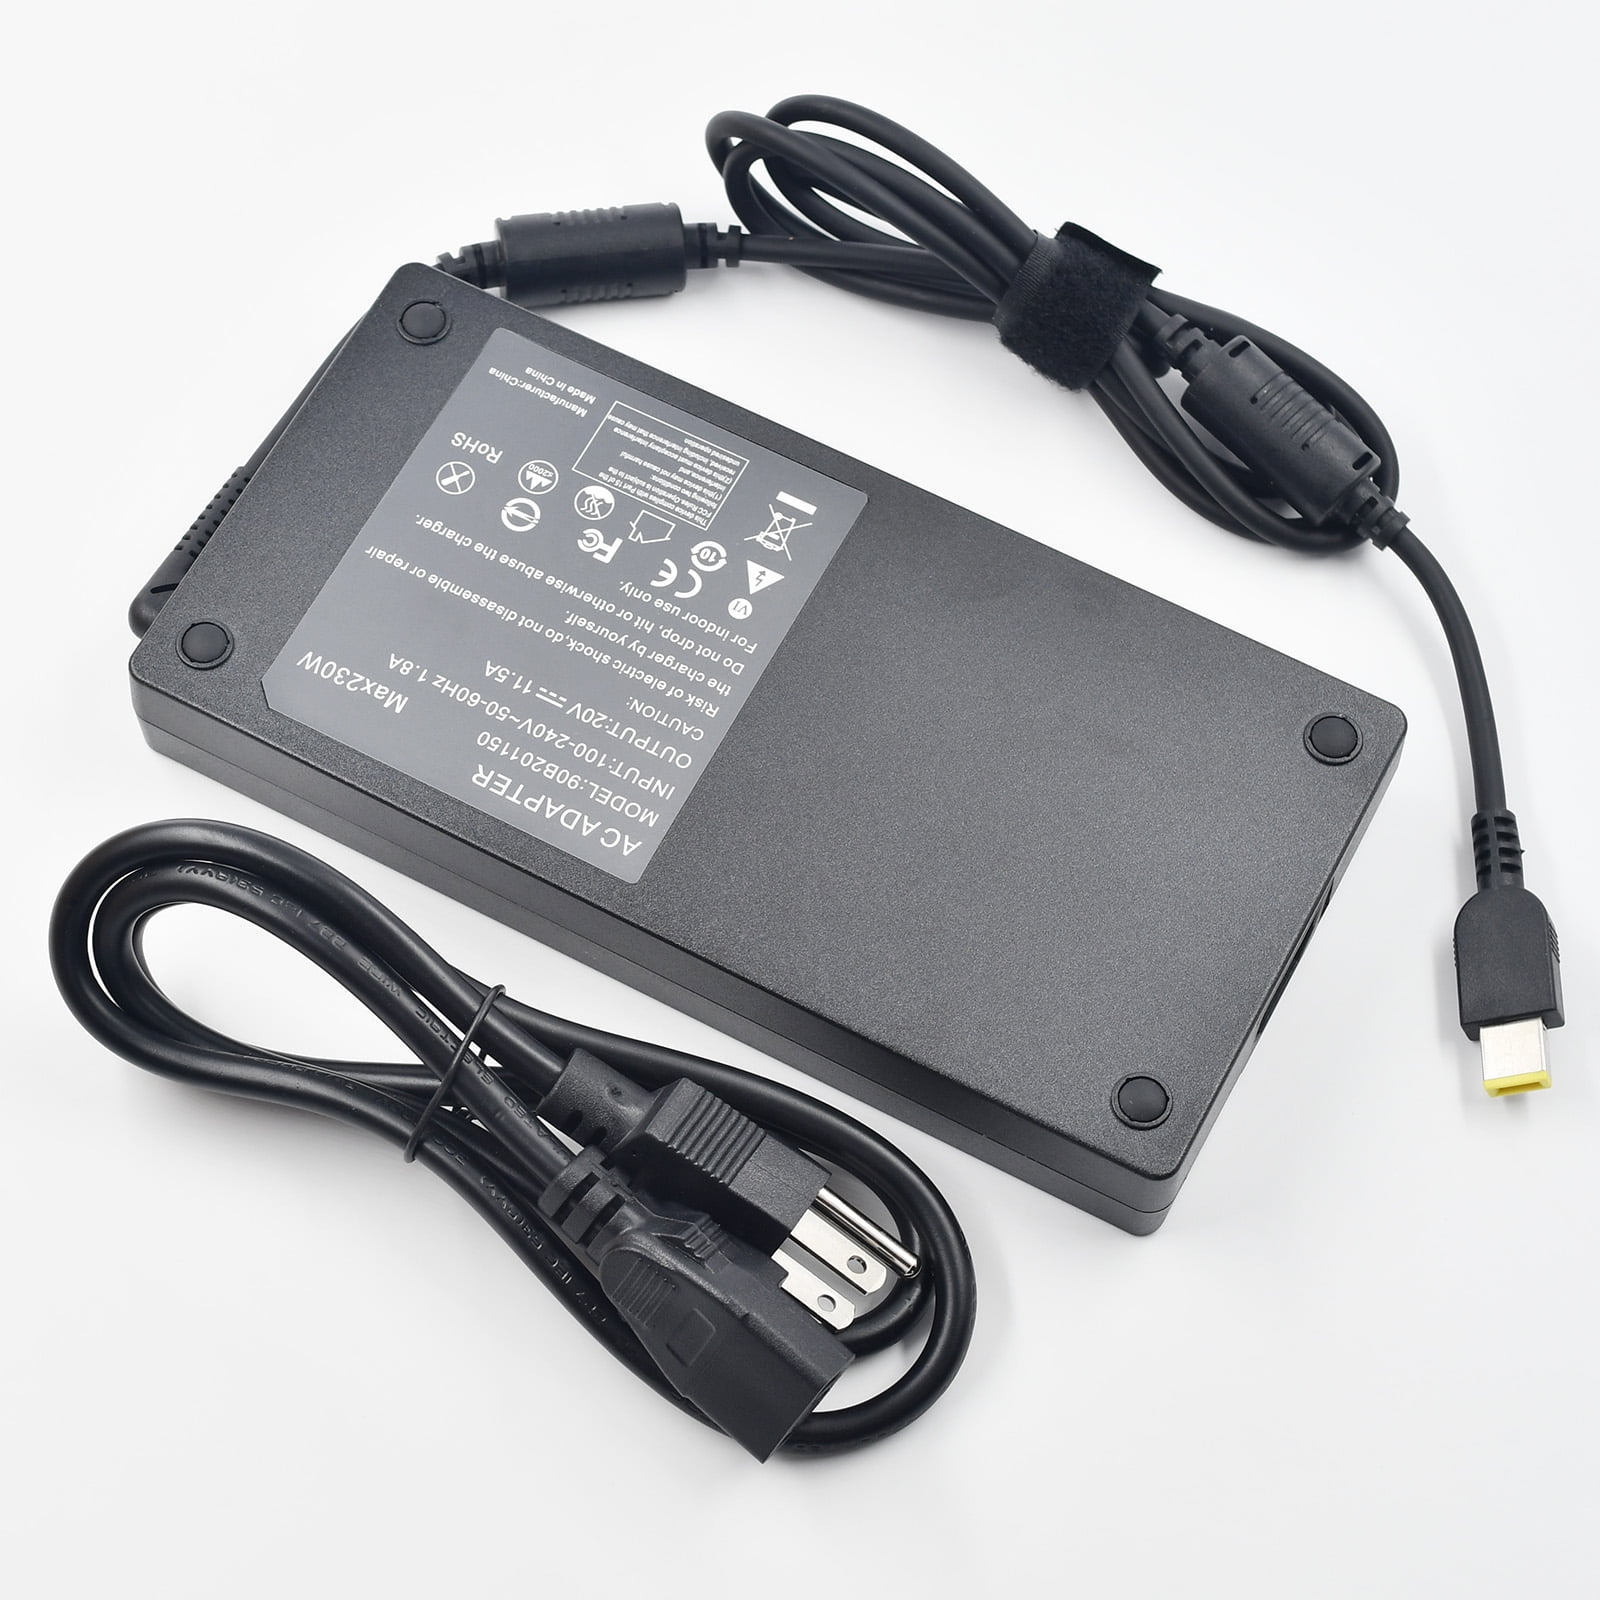 Lenovo 230W AC Adapter Laptop Charger for Lenovo Legion 5 7 Y540 Y545 Y740  Y730 Y900 Y7000 Lenovo ThinkPad P50 P70 Y910 4X20E75111 GX20L29347